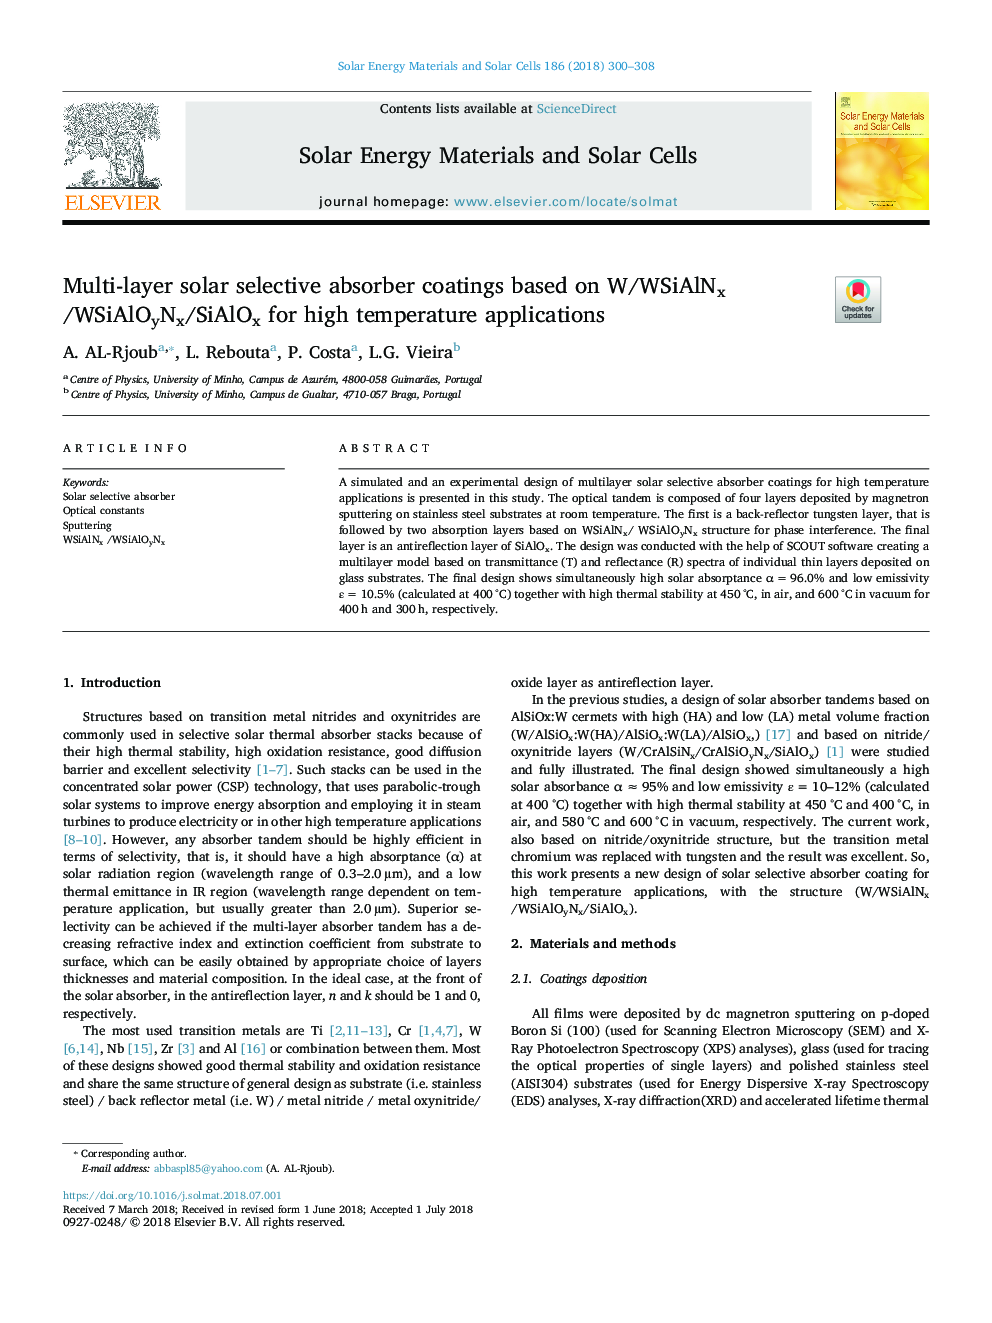 Multi-layer solar selective absorber coatings based on W/WSiAlNx /WSiAlOyNx/SiAlOx for high temperature applications